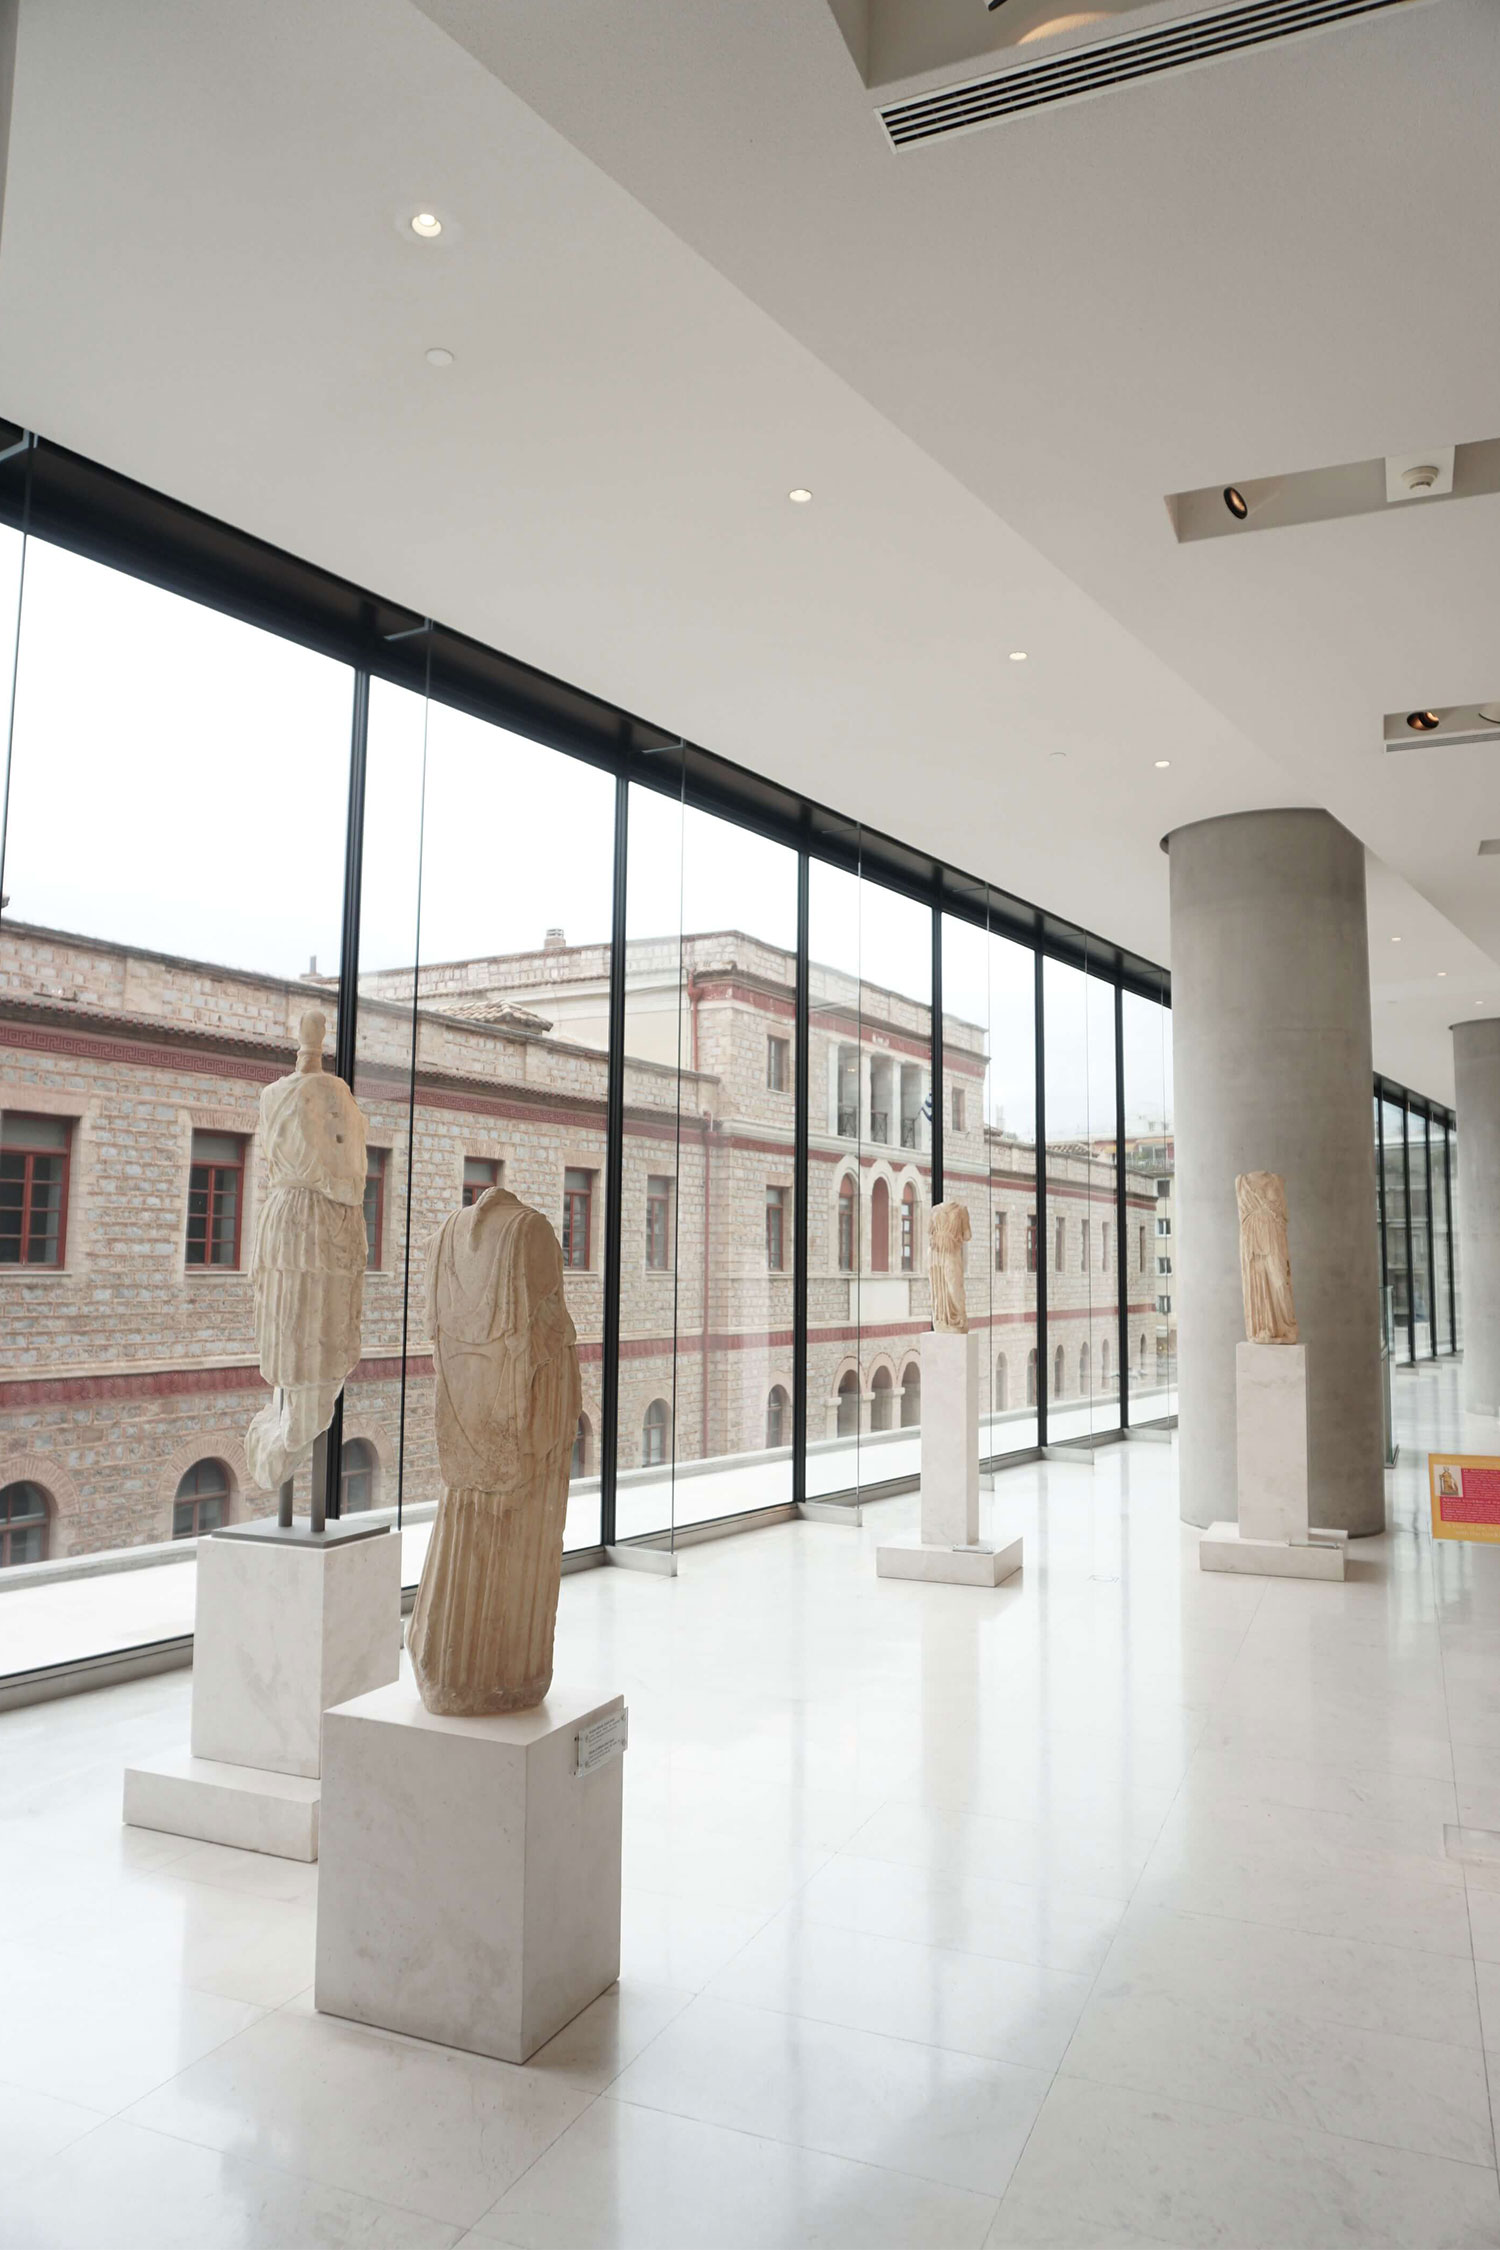 Archeological Museum (Acropolis Museum)  - Multiple headless statues dressed in togas 5